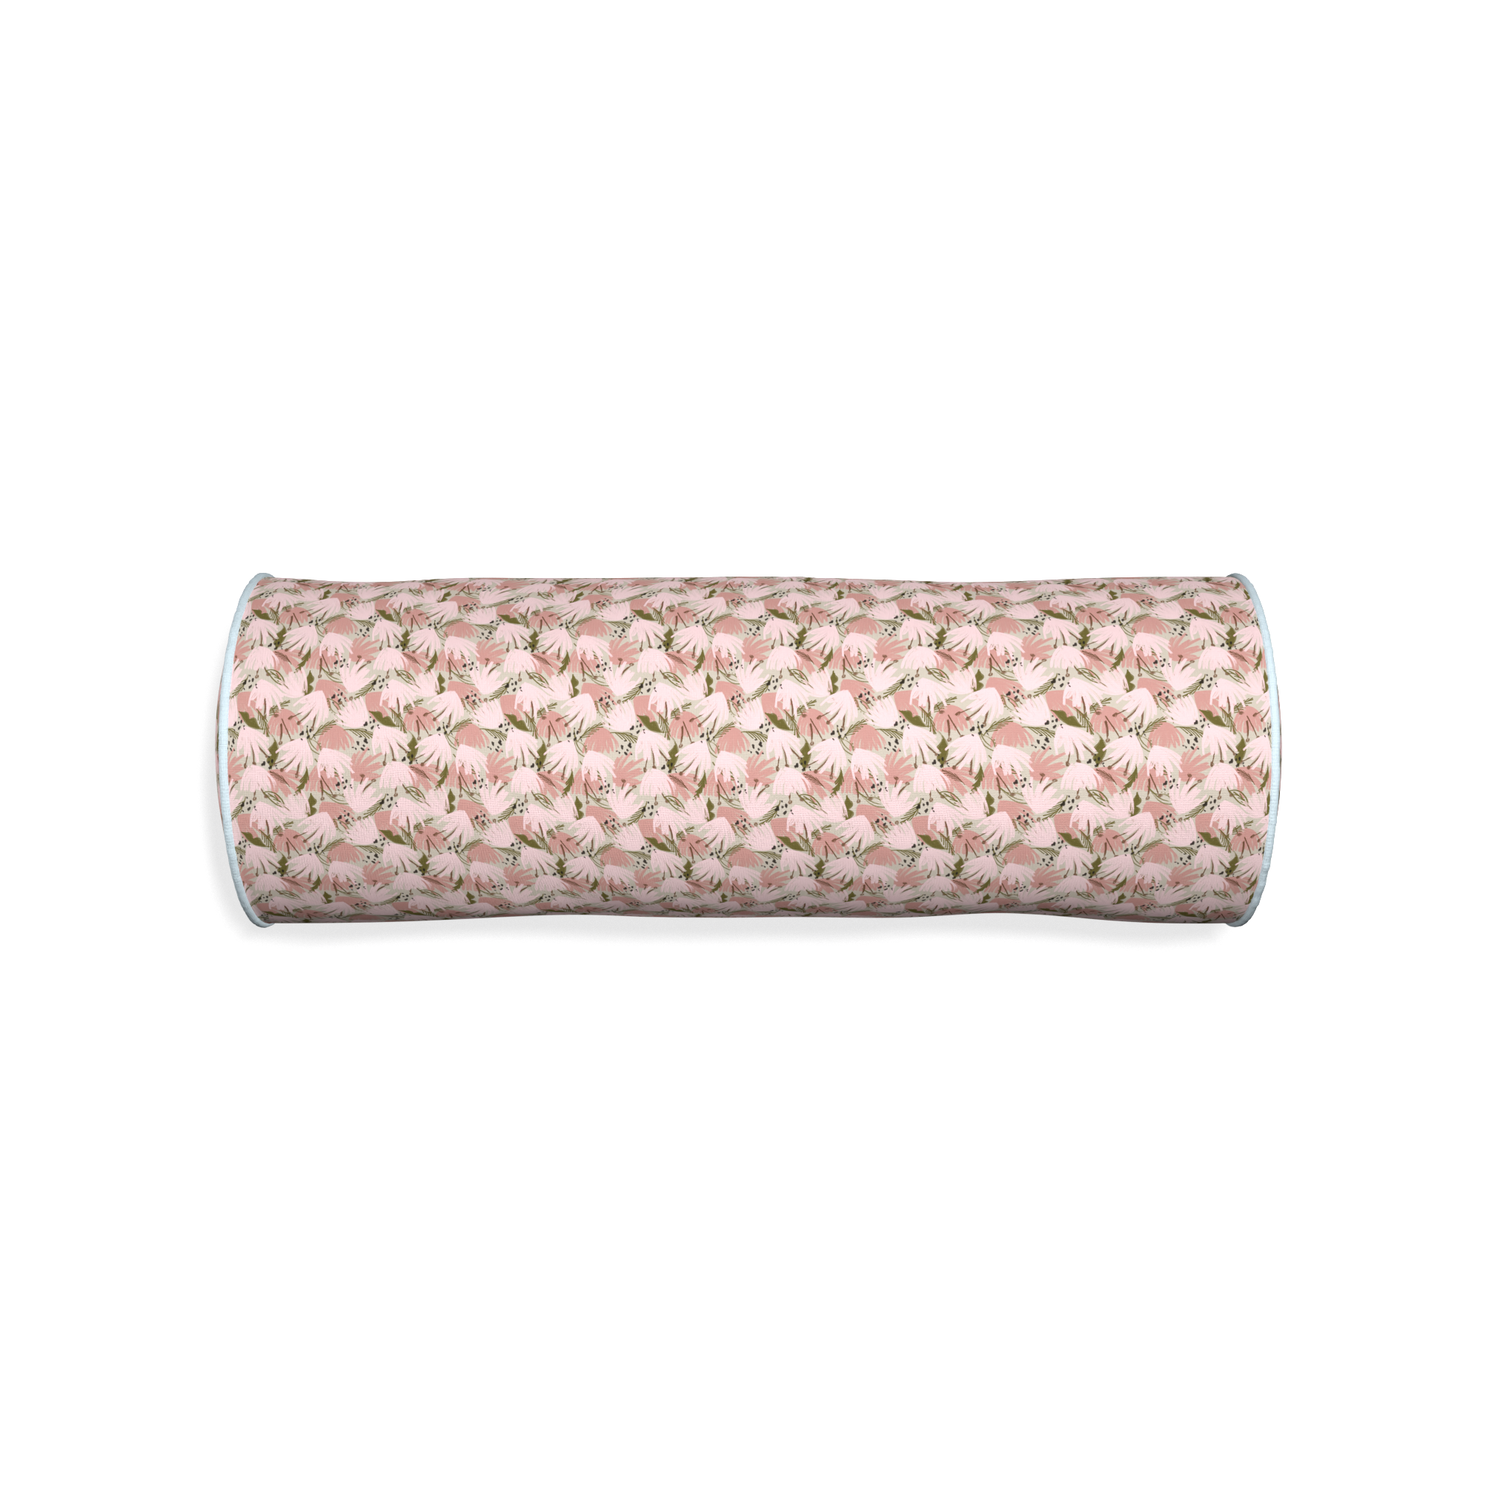 Bolster eden pink custom pink floralpillow with powder piping on white background